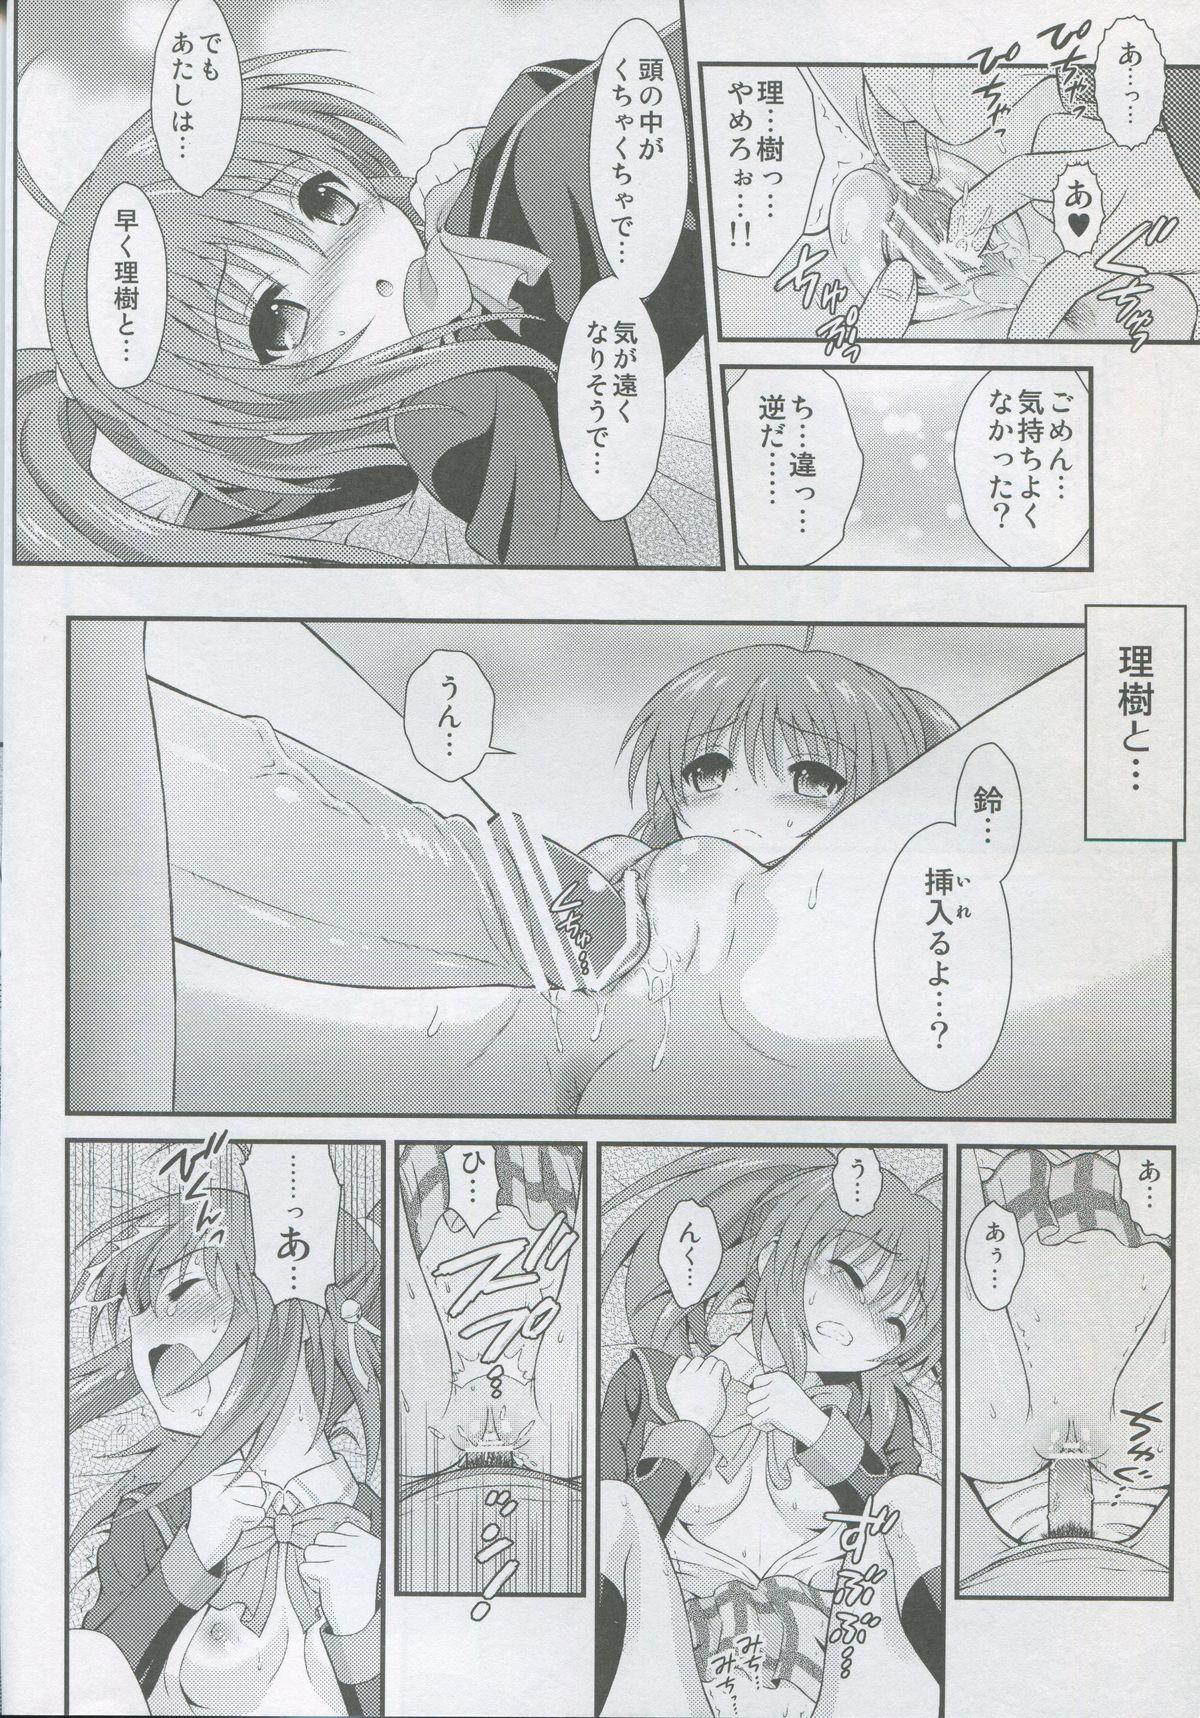 Celebrity Sex Riki Rin! - Little busters No Condom - Page 7